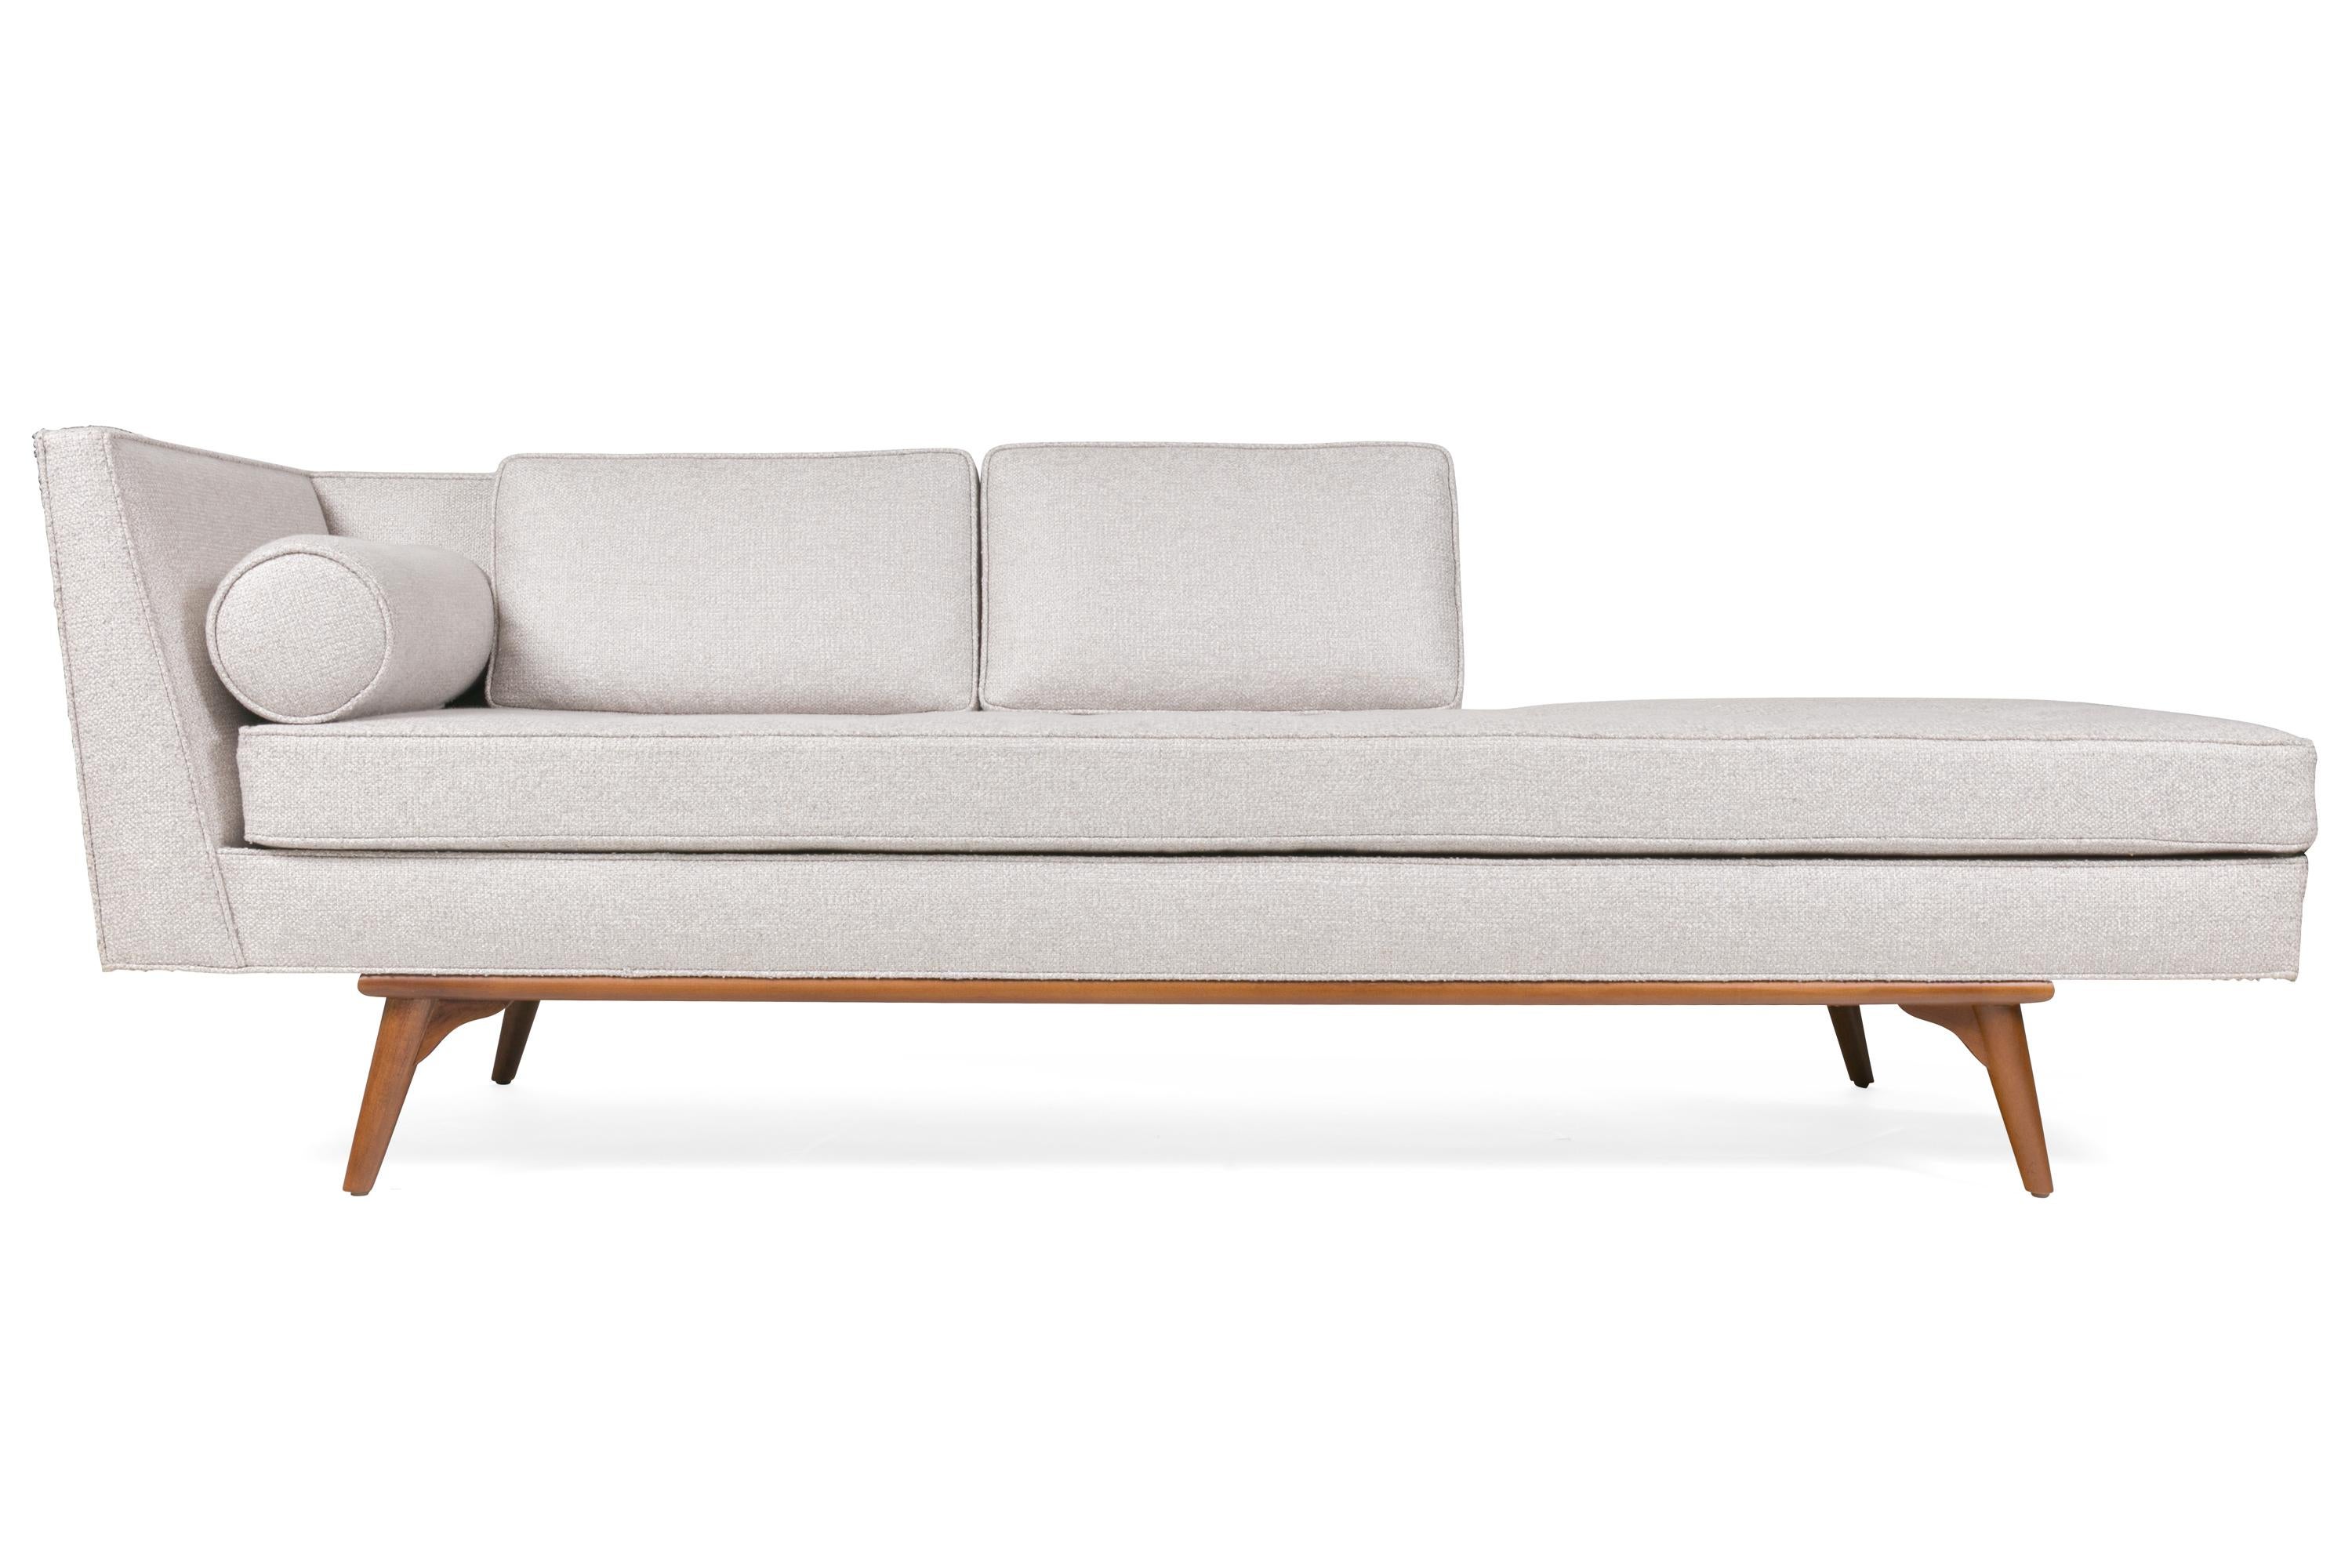 Sleek chaise lounge appeal with the added function of a more standard sofa design. Features a tufted seat cushion, and a pair of down back cushions and cylinder bolster. Available with a right or left arm, and can be customized to the customers